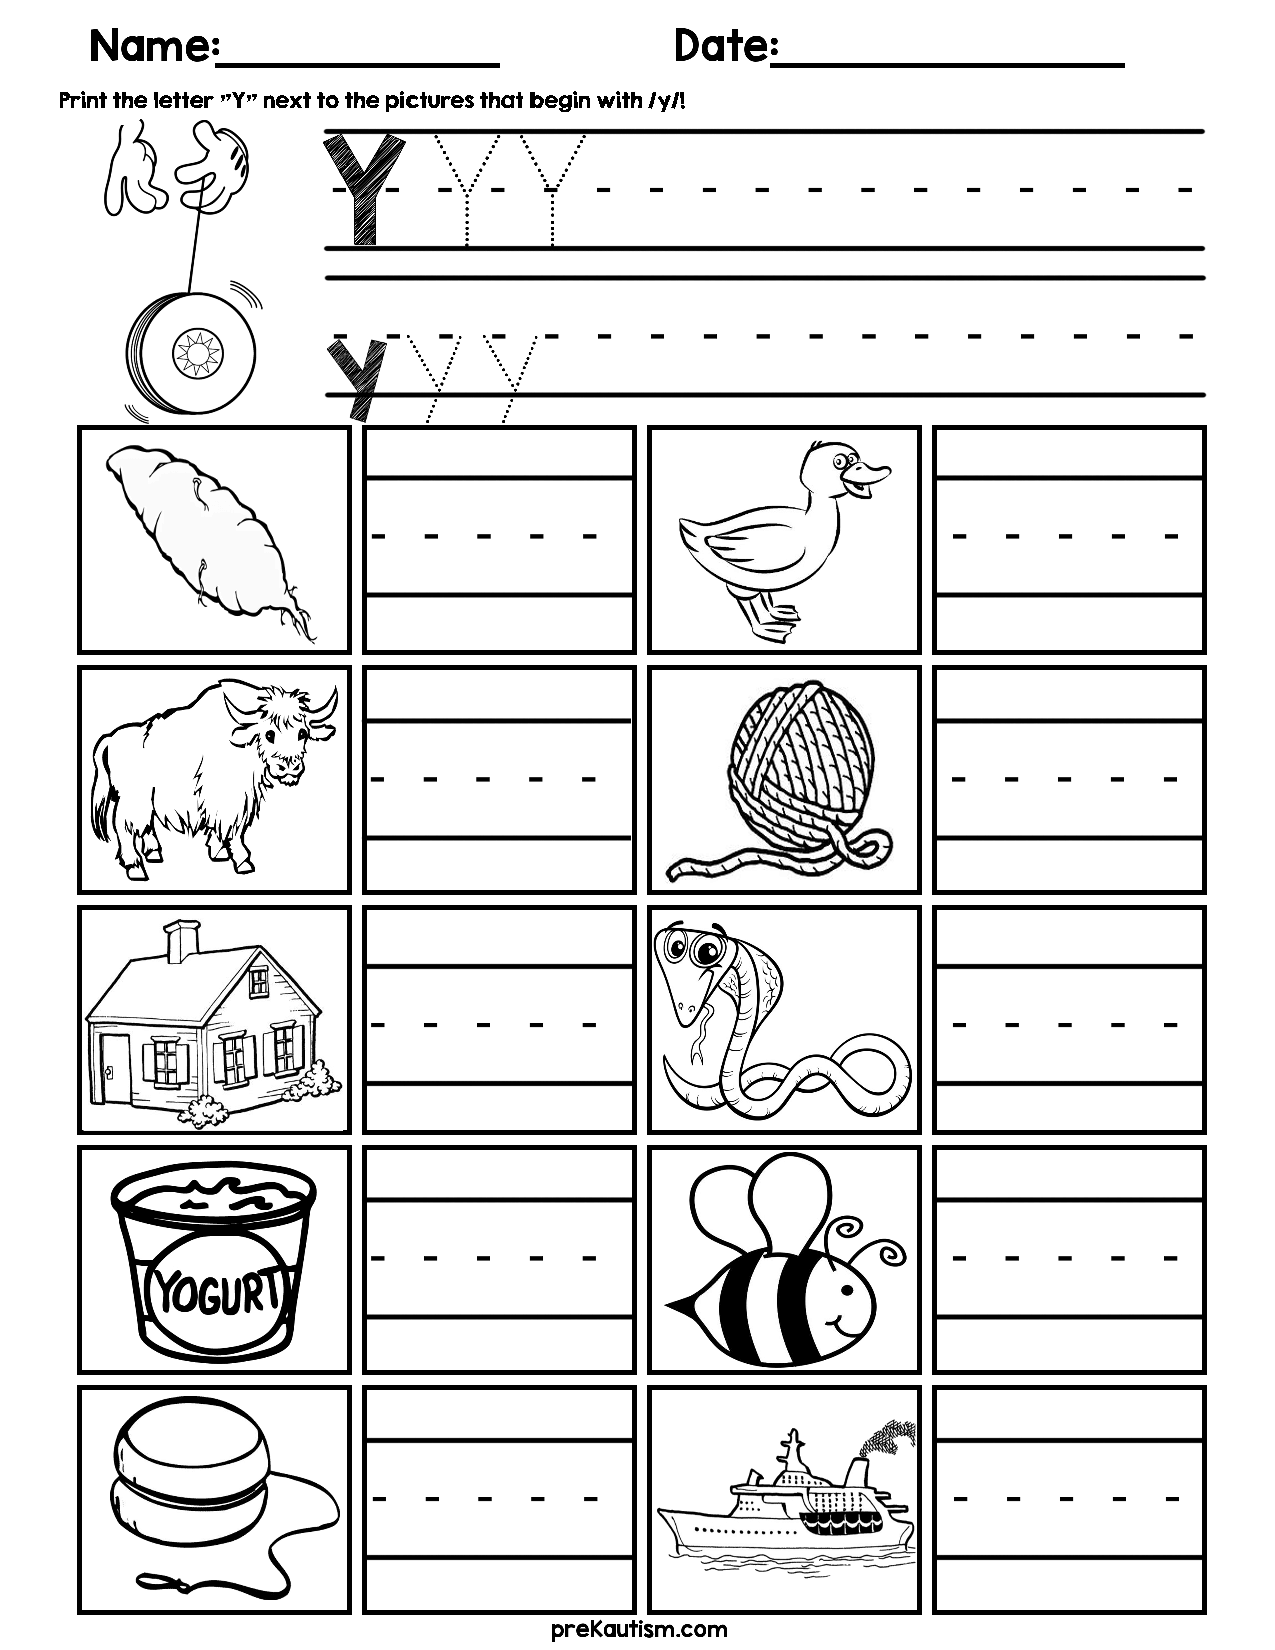 $1.99 | Worksheets For Practicing Initial Consonants: B, C intended for Letter H Worksheets Soft School